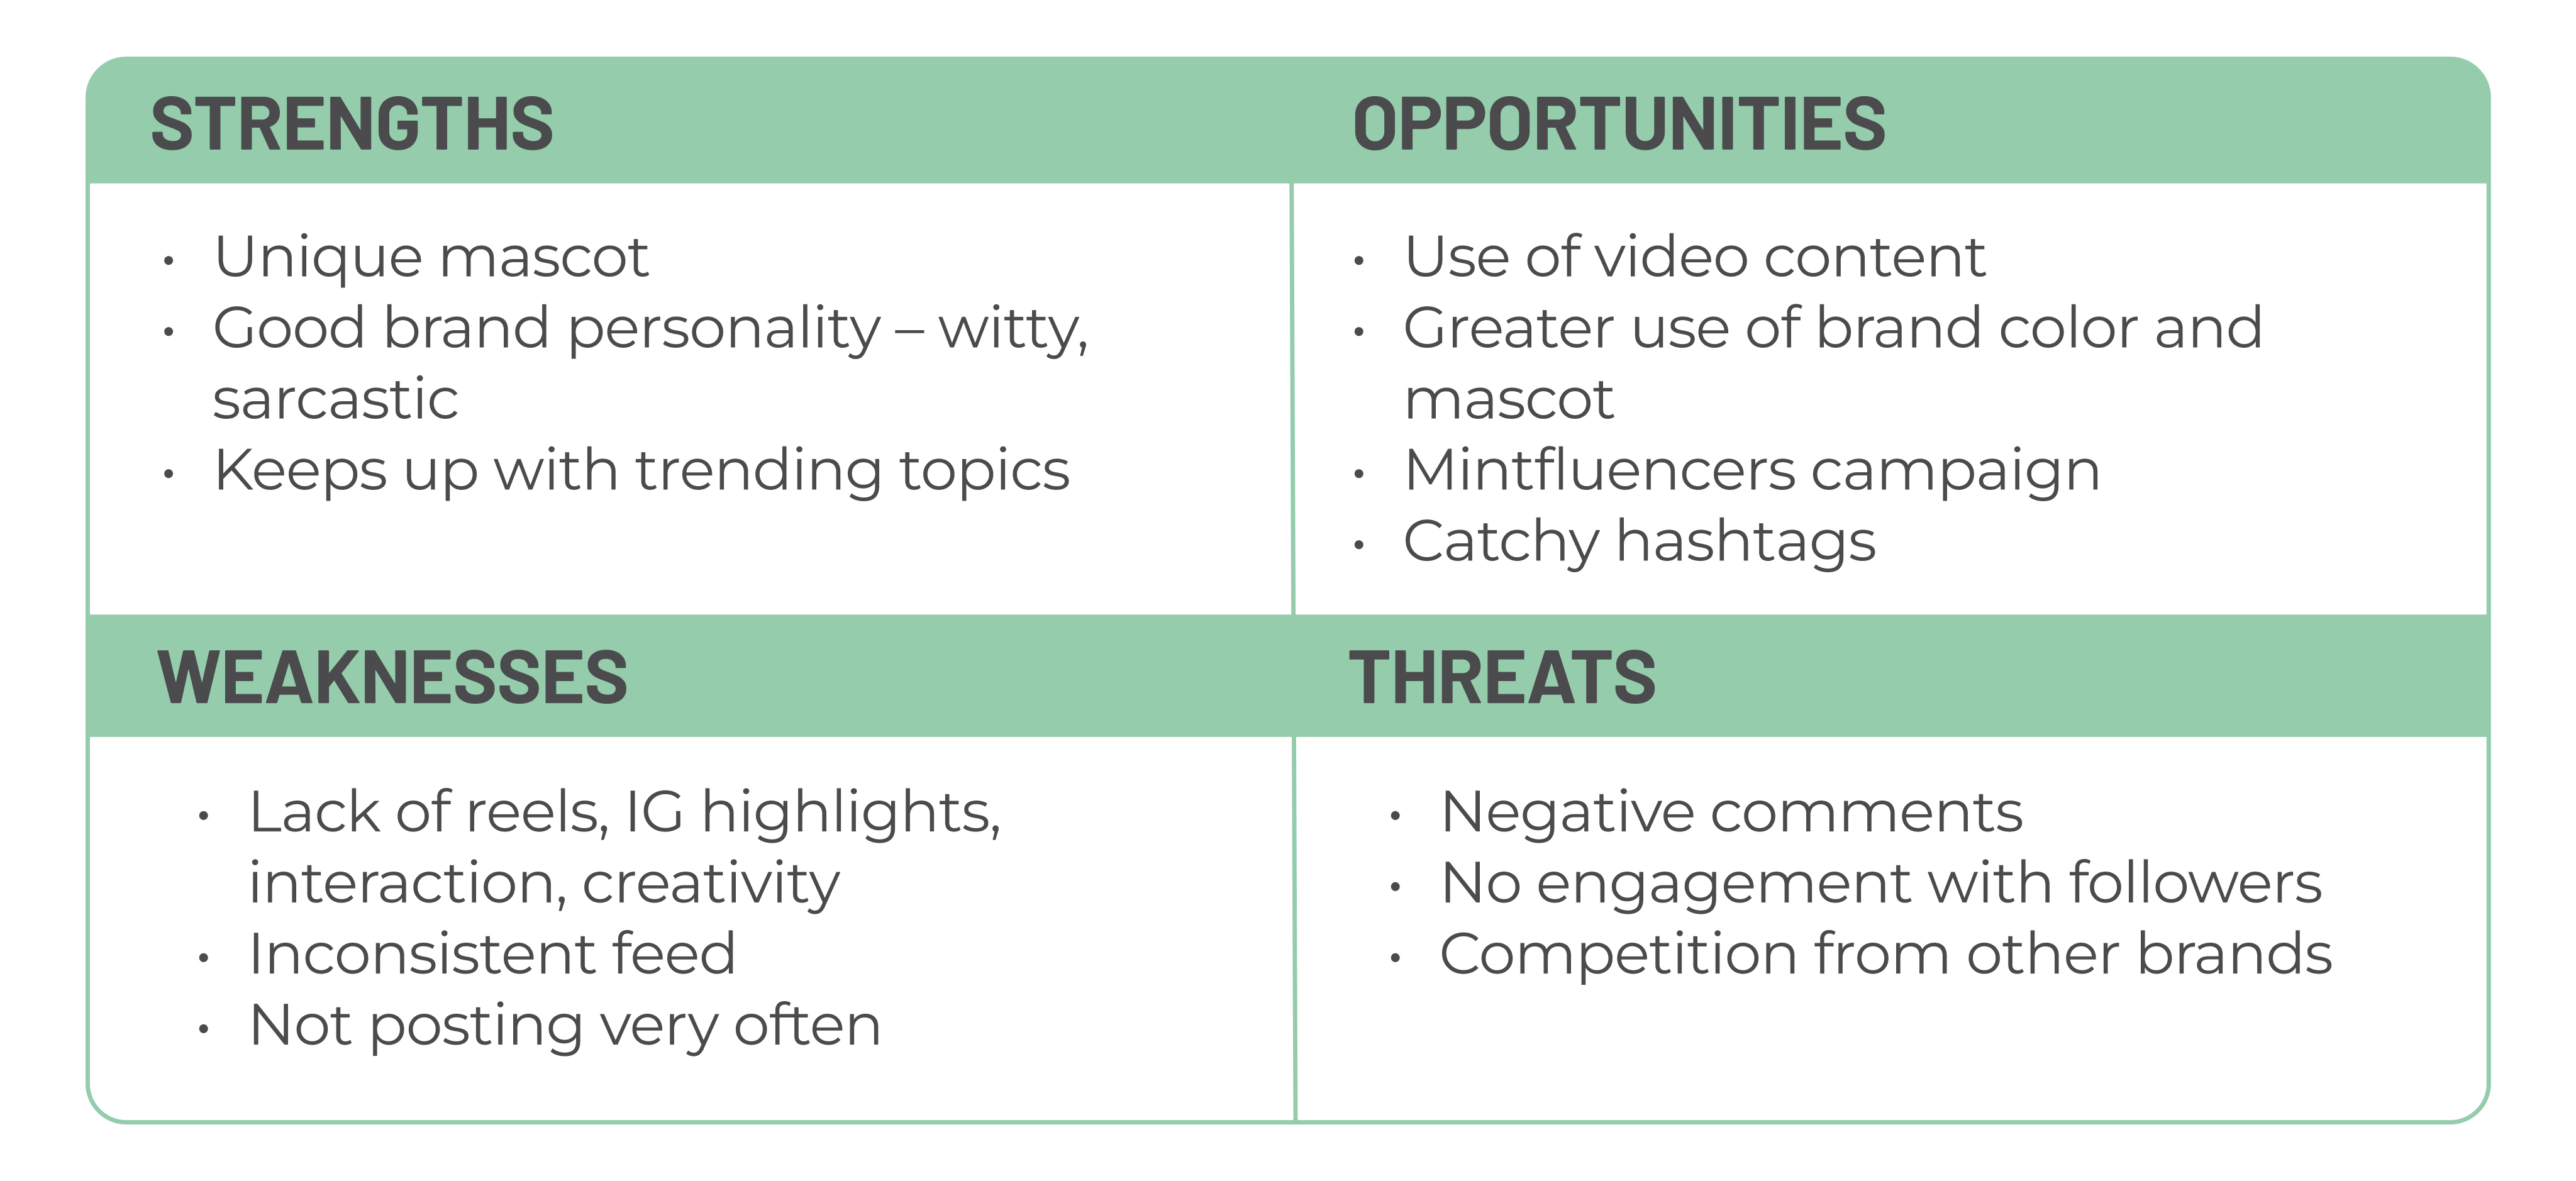 SWOT Analysis of Mint Mobile's Instagram